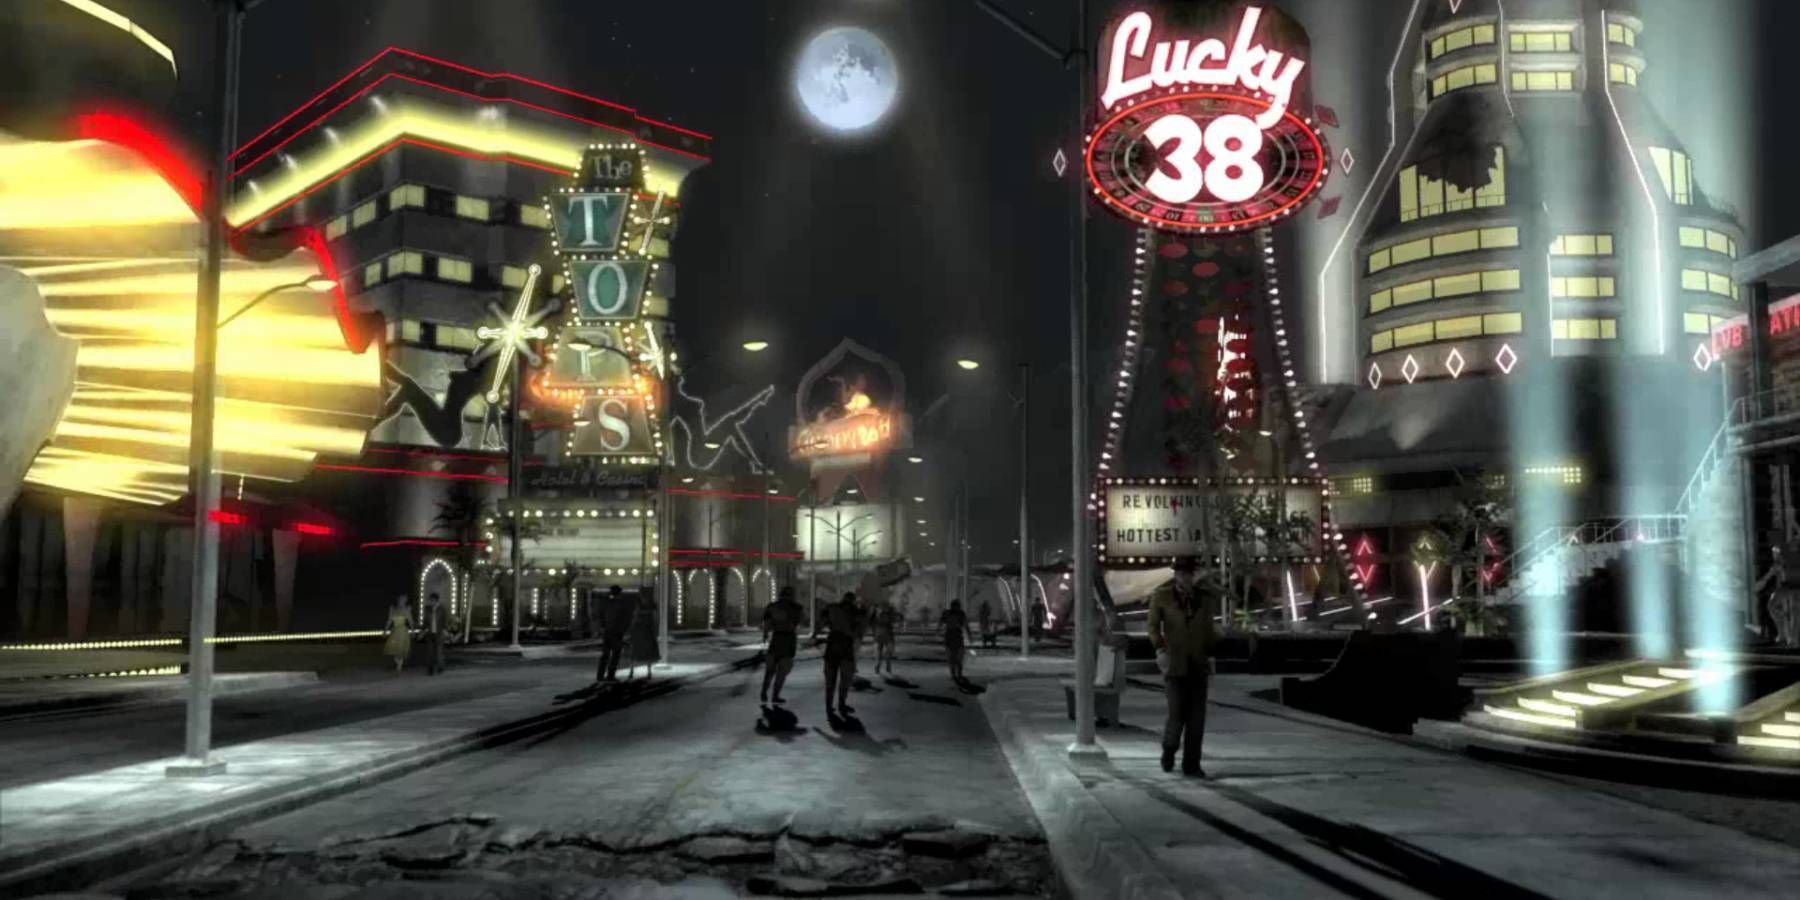 New Vegas at night in the intro of Fallout: New Vegas